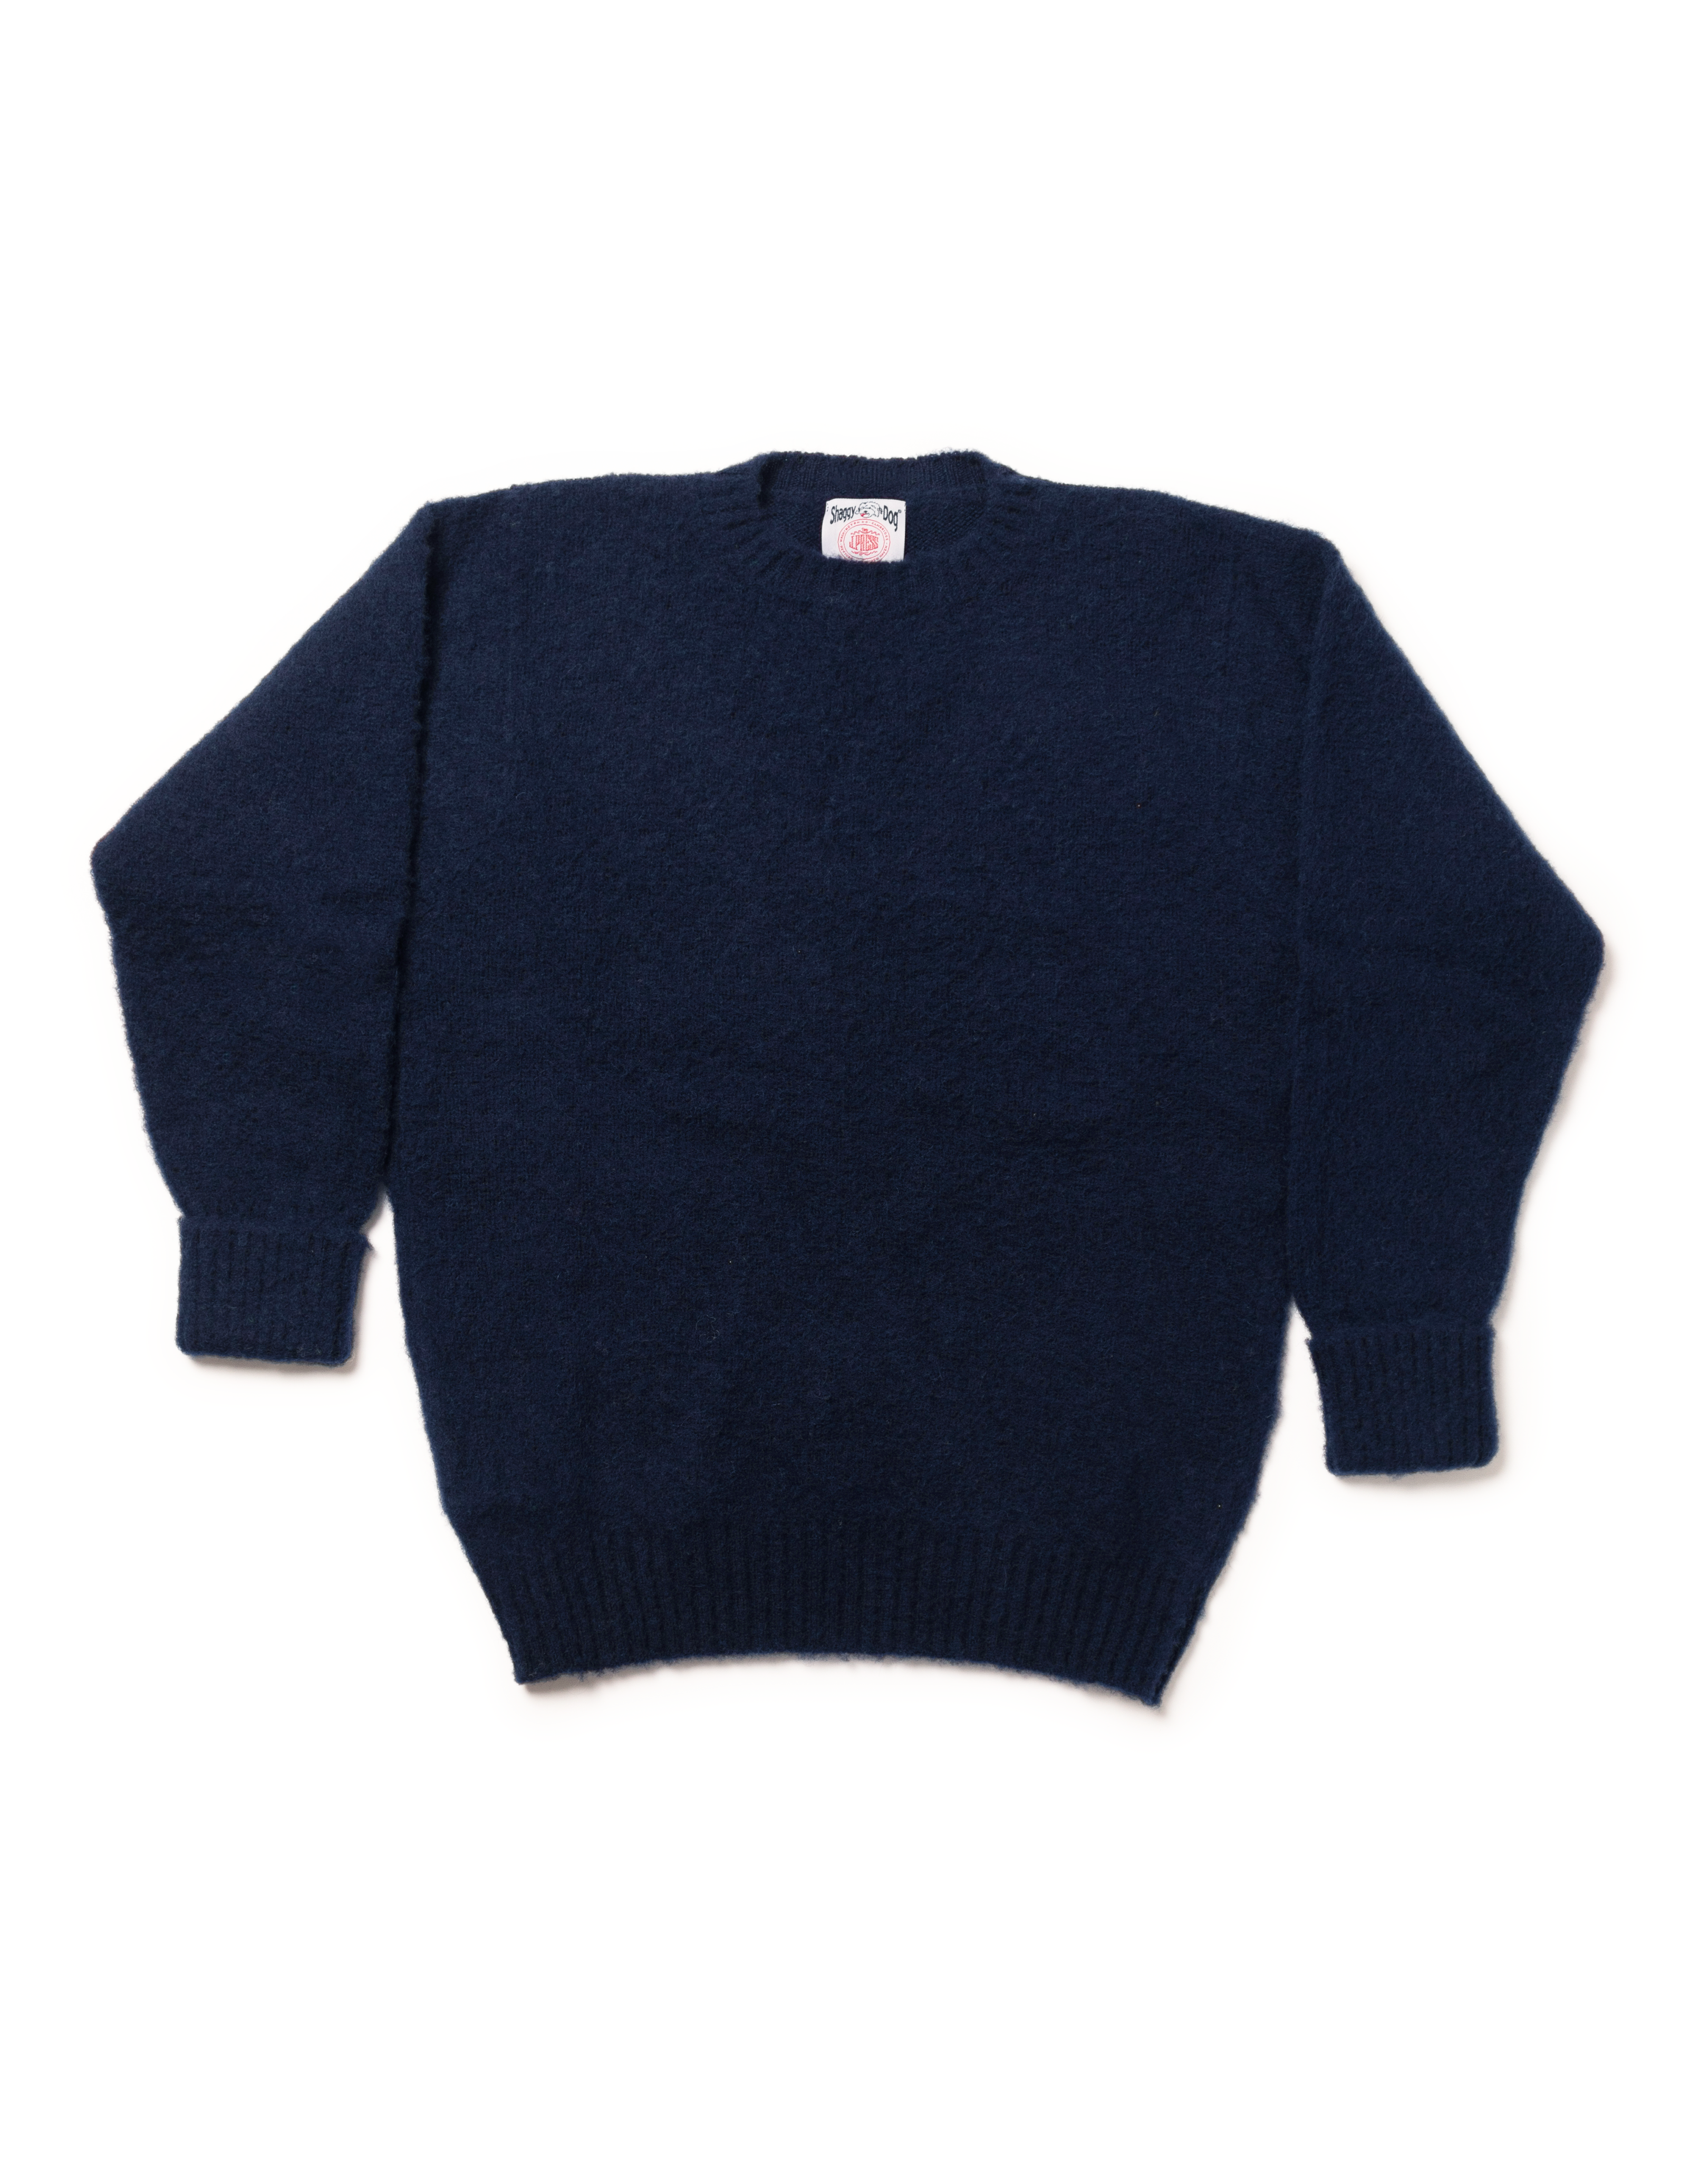 Classic Sportswear on X: Order your Australian Made Knitted